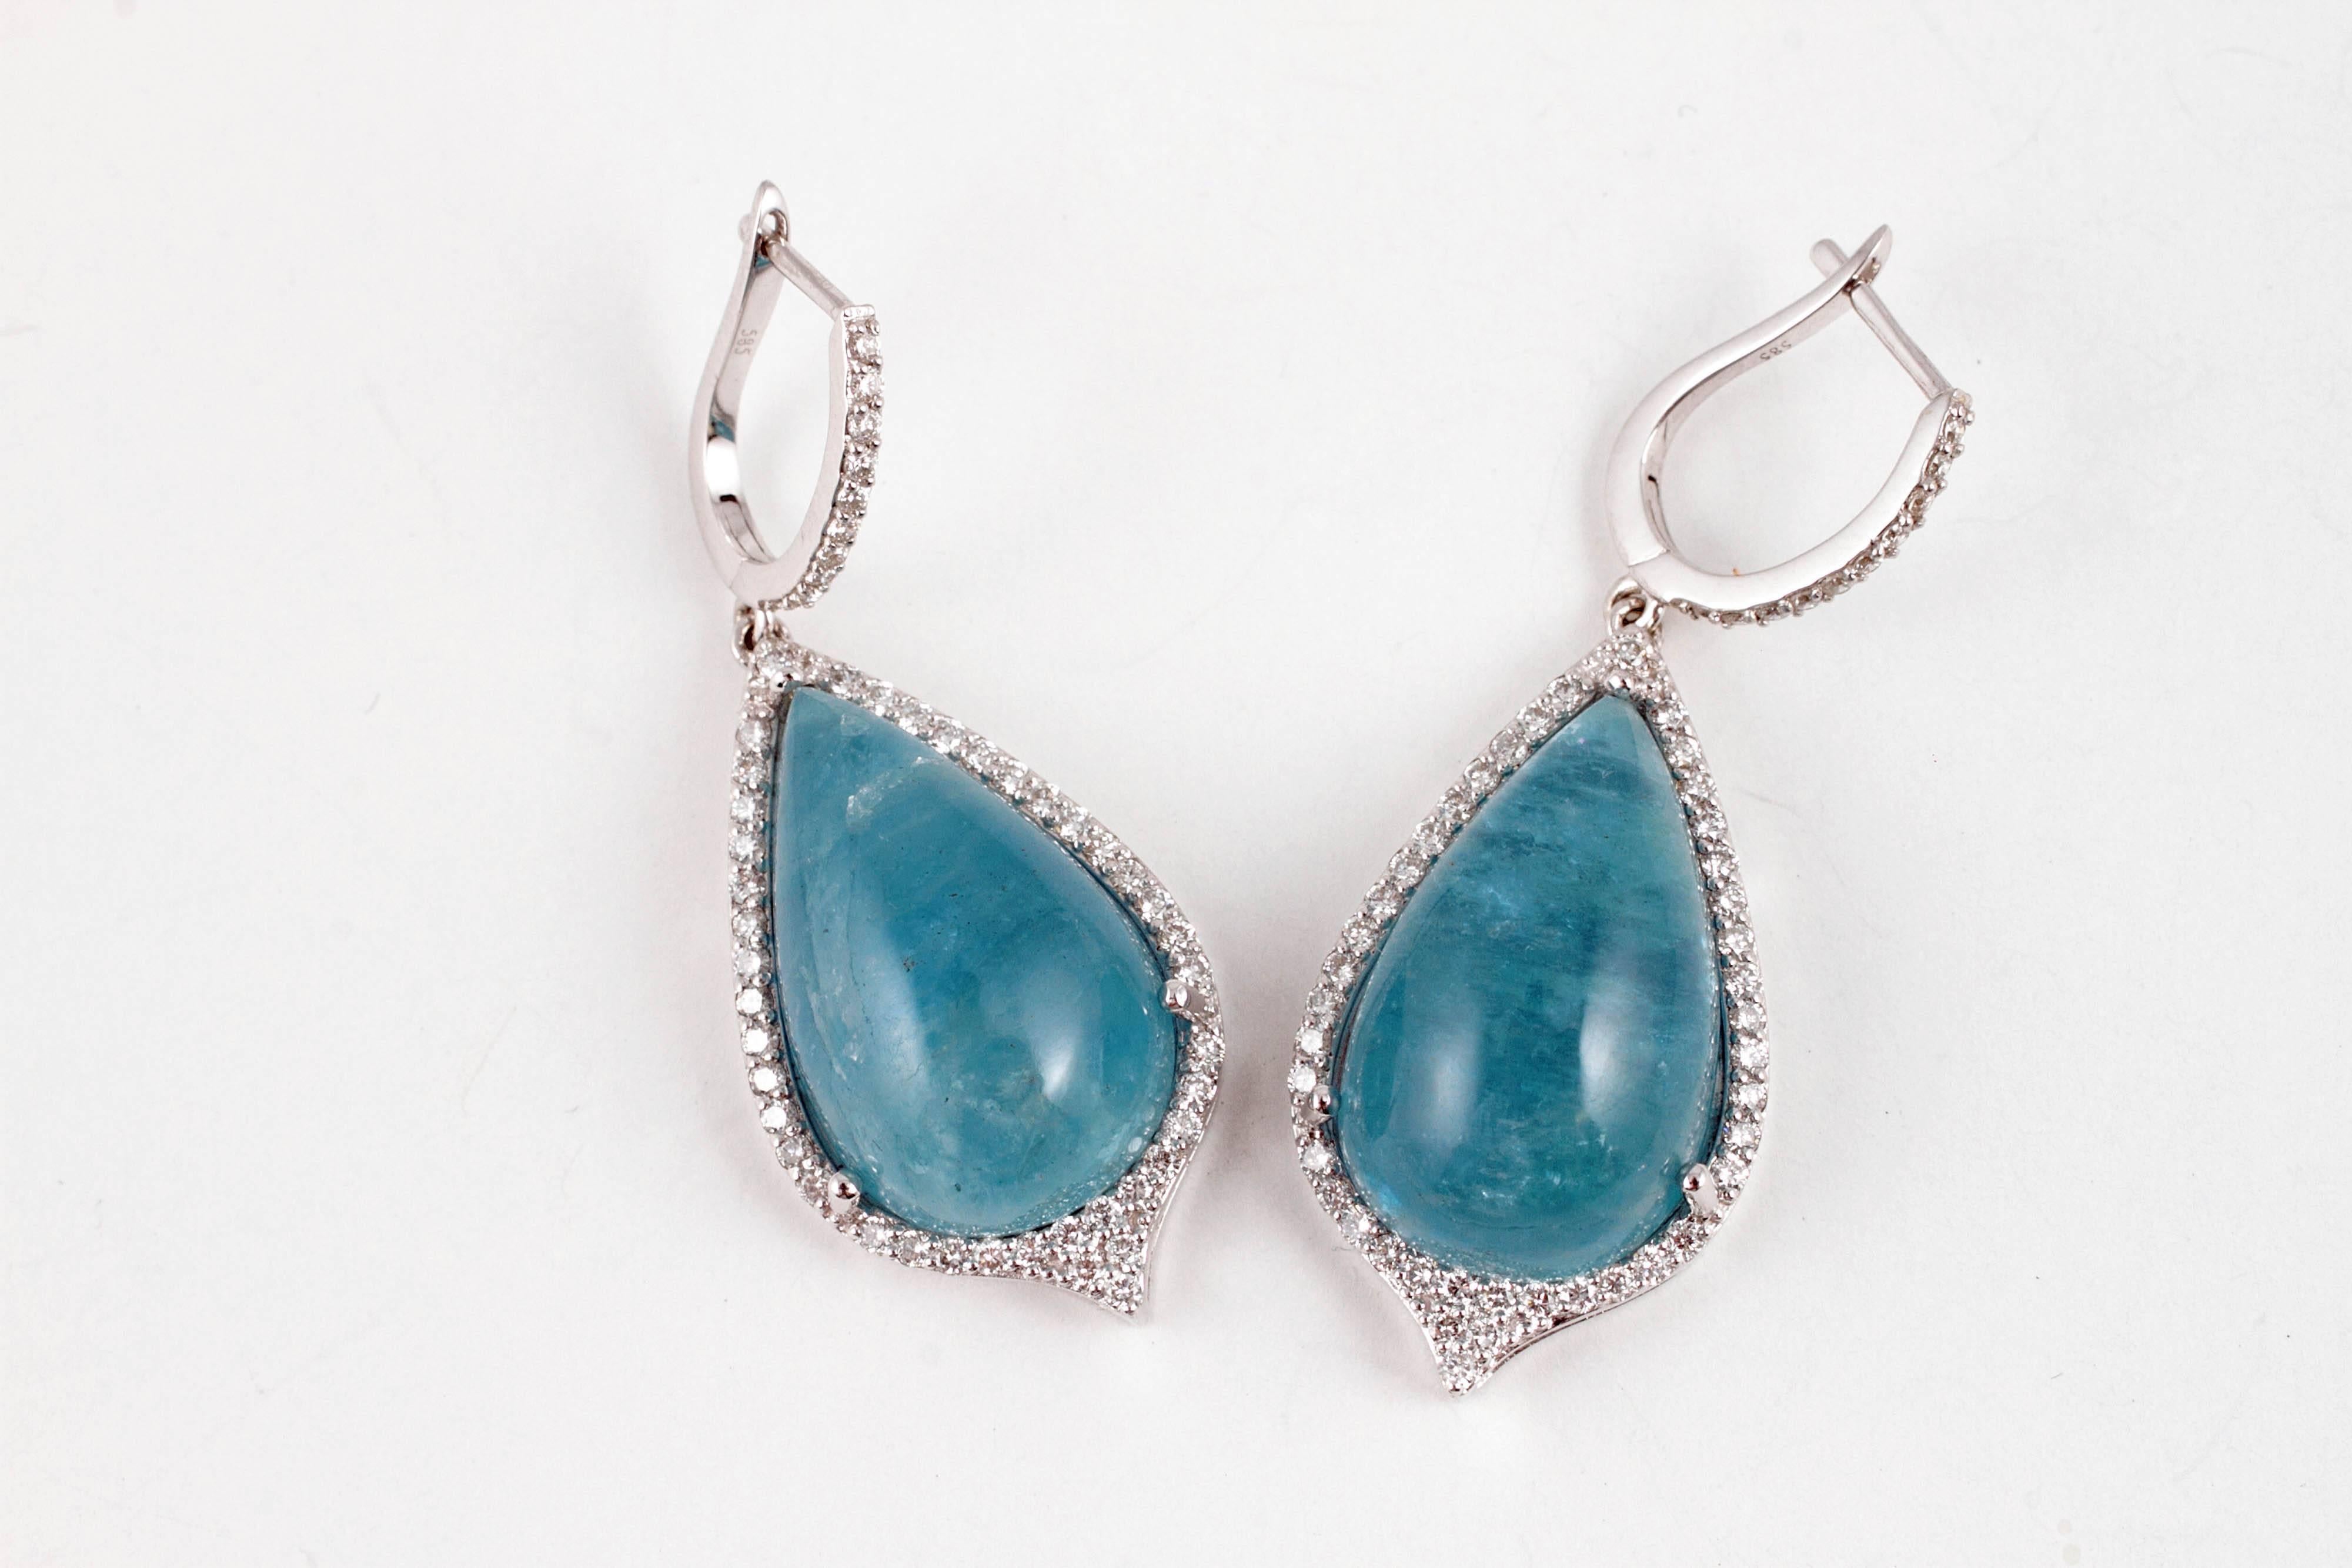 You would never guess how light these beauties are! In 14 karat white gold, with 1.75 total weight of diamonds around the cabochon-cut aquamarine stones.  The aqua's weigh approximately 30.00 carats total weight.  They are perfect!